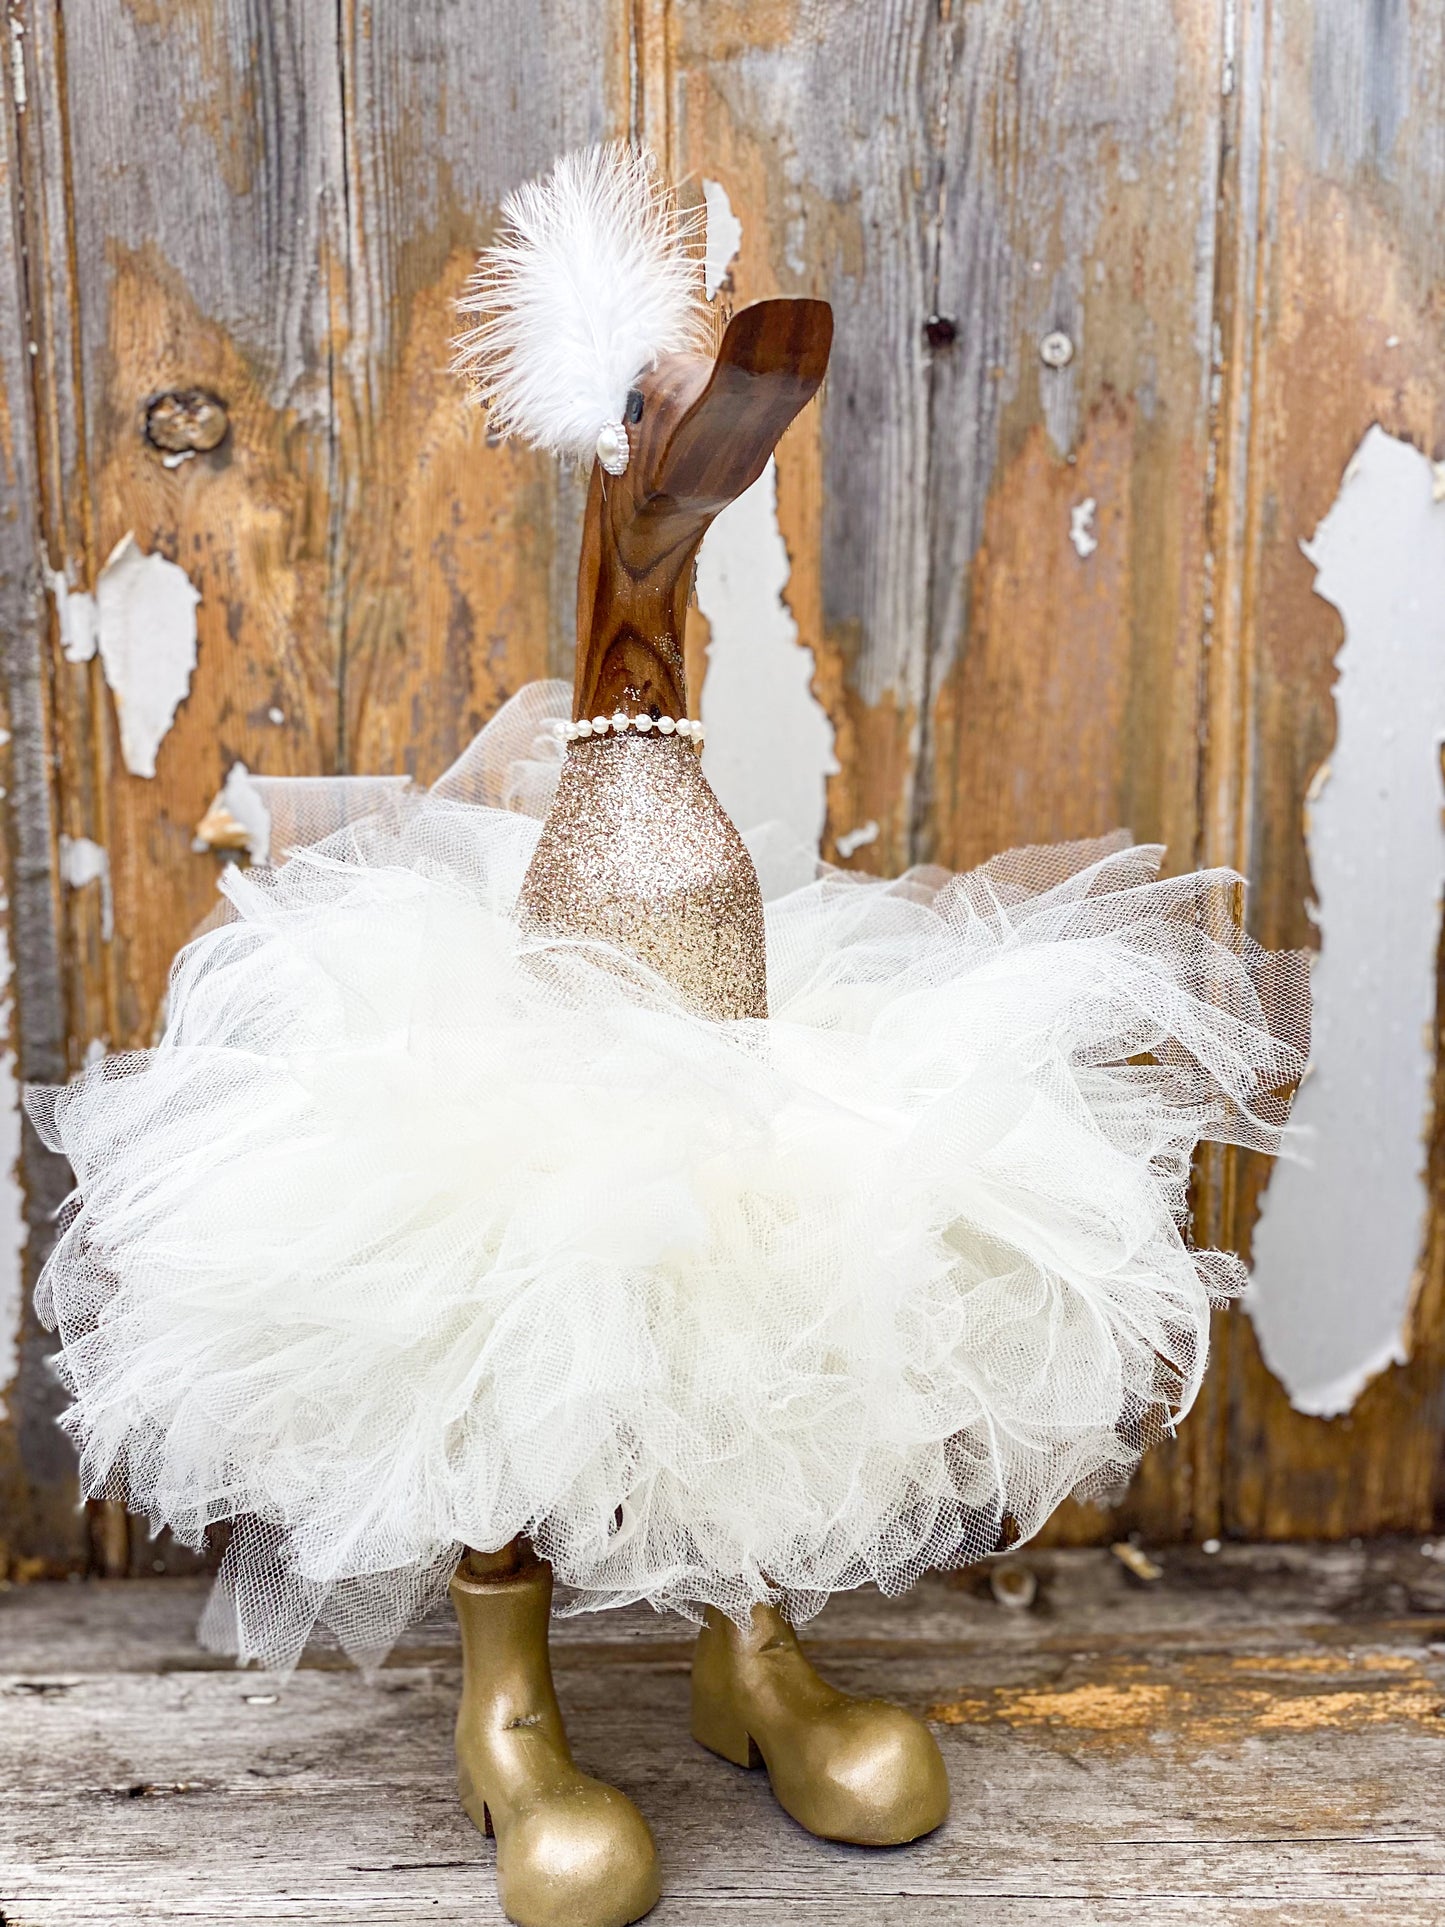 Crystal The Glitter Tutu Duck - Decorated Wooden Duck in Boots by Mrs H the Duck Lady